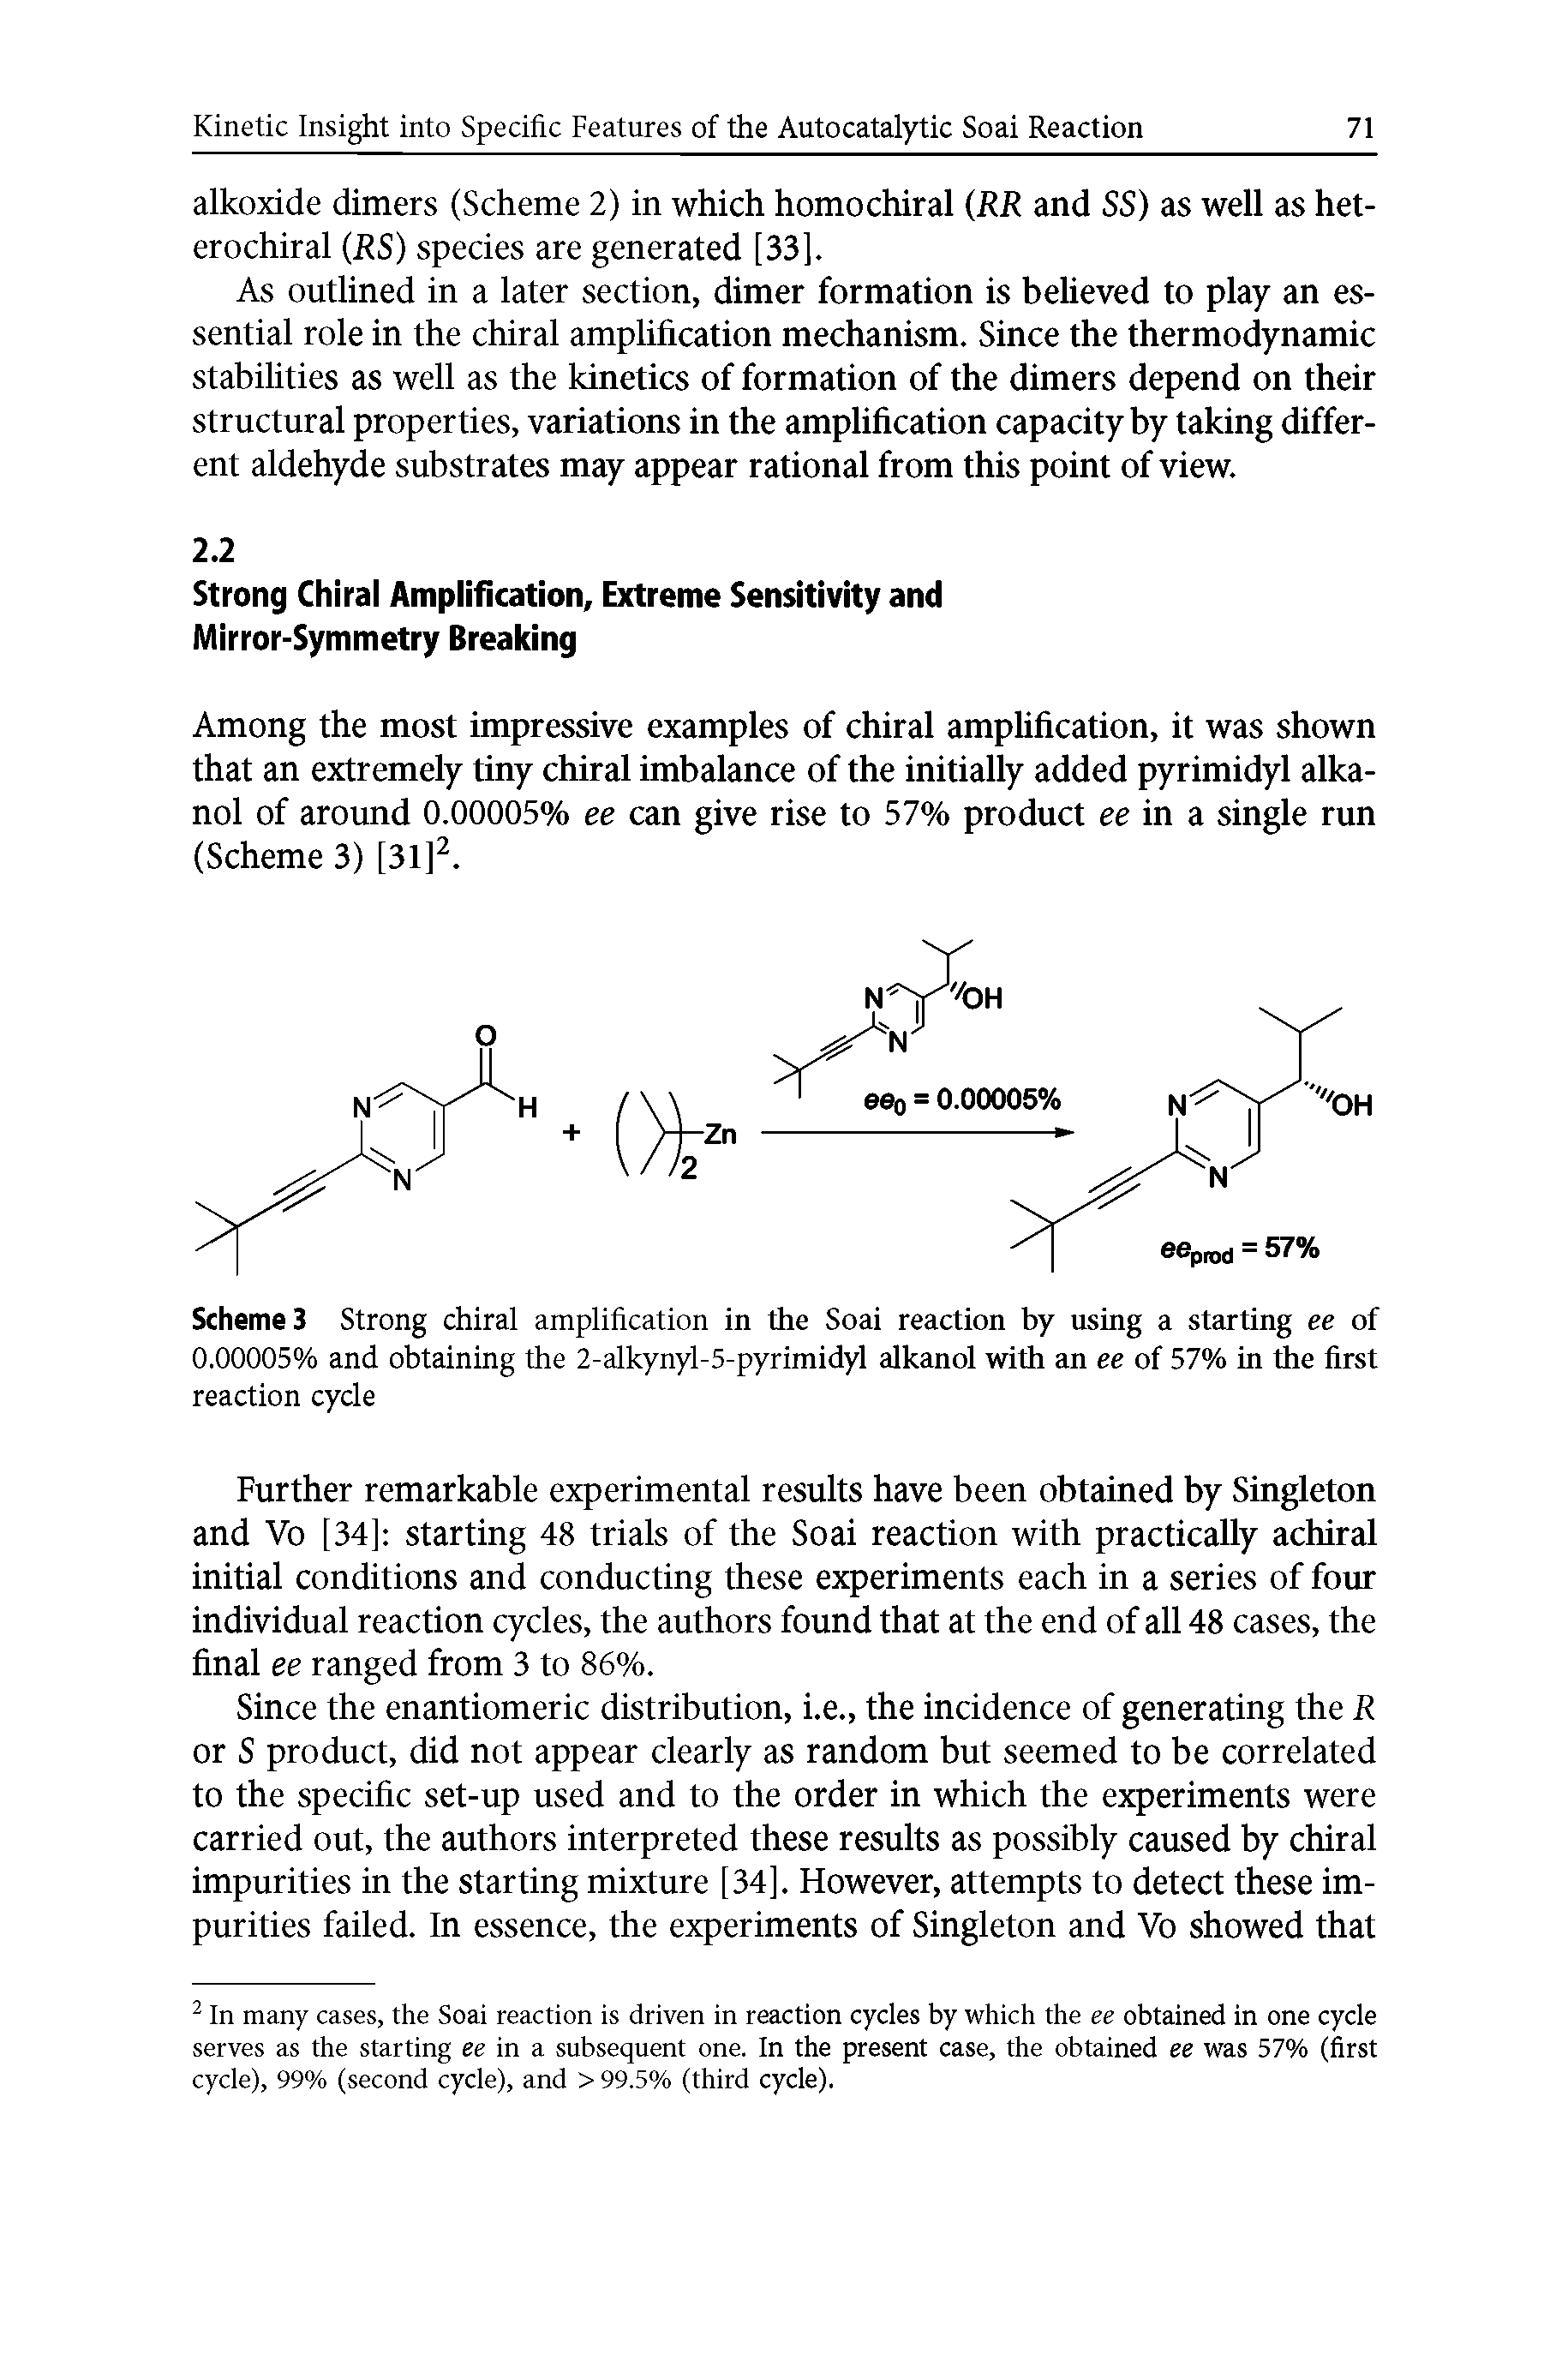 Scheme 3 Strong chiral amplification in the Soai reaction by using a starting ee of 0.00005% and obtaining the 2-alkynyl-5-pyrimidyl alkanol with an ee of 57% in the first reaction cycle...